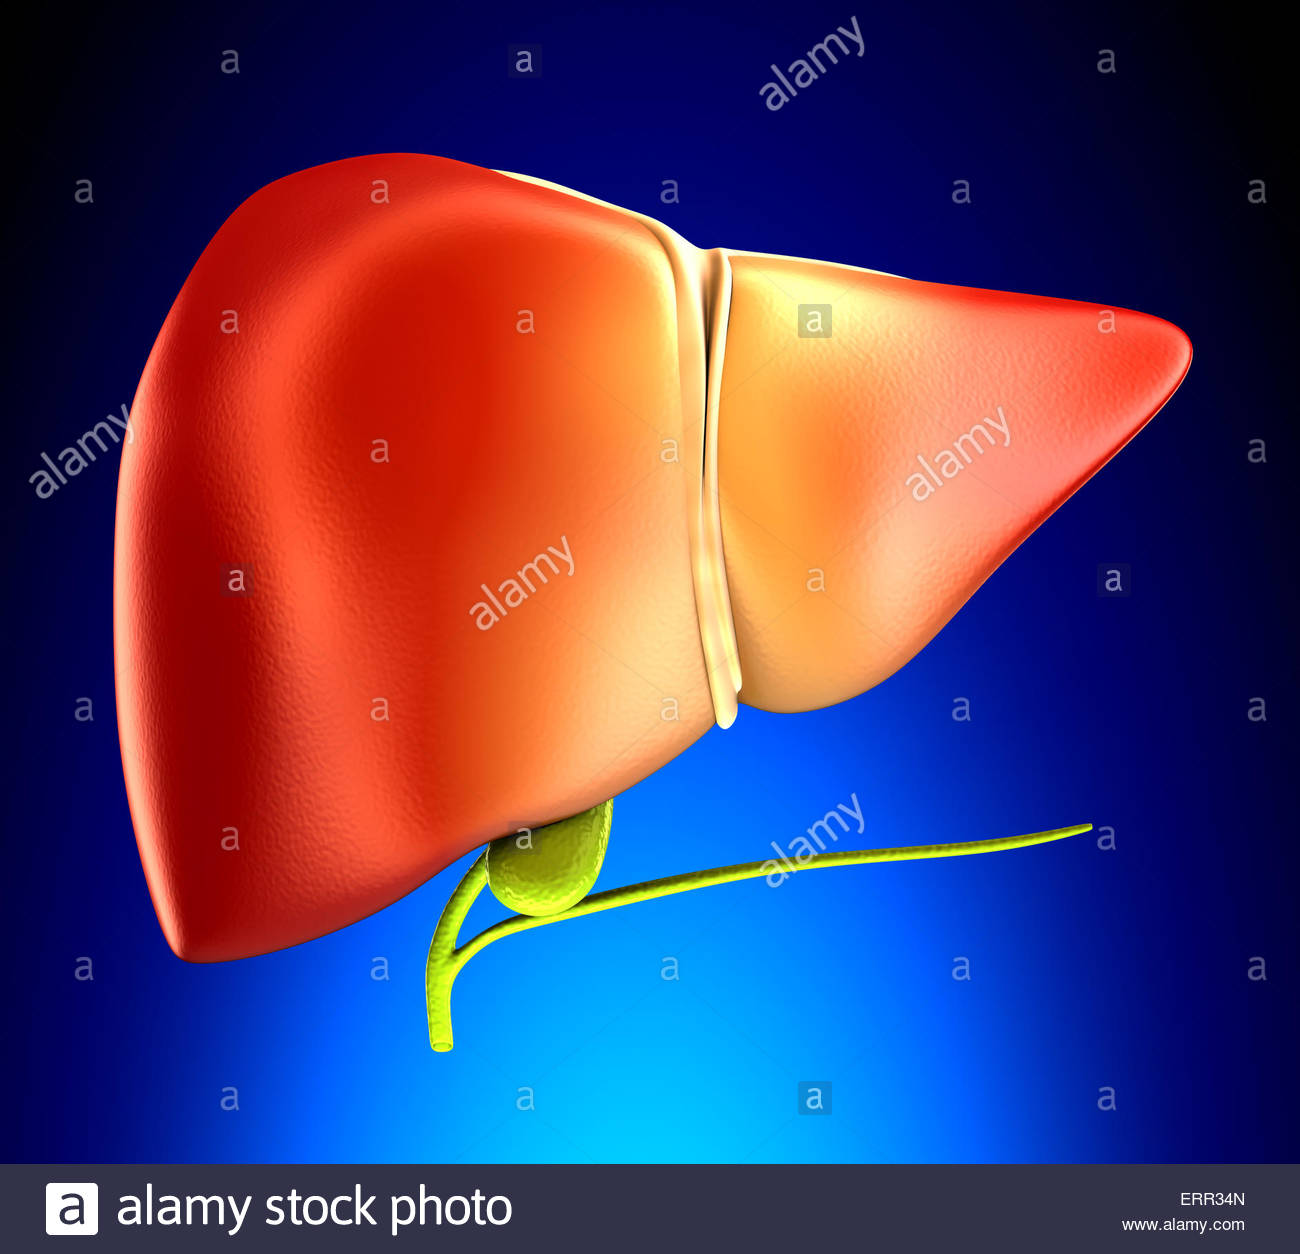 Real Healthy Liver Stock Photos Image